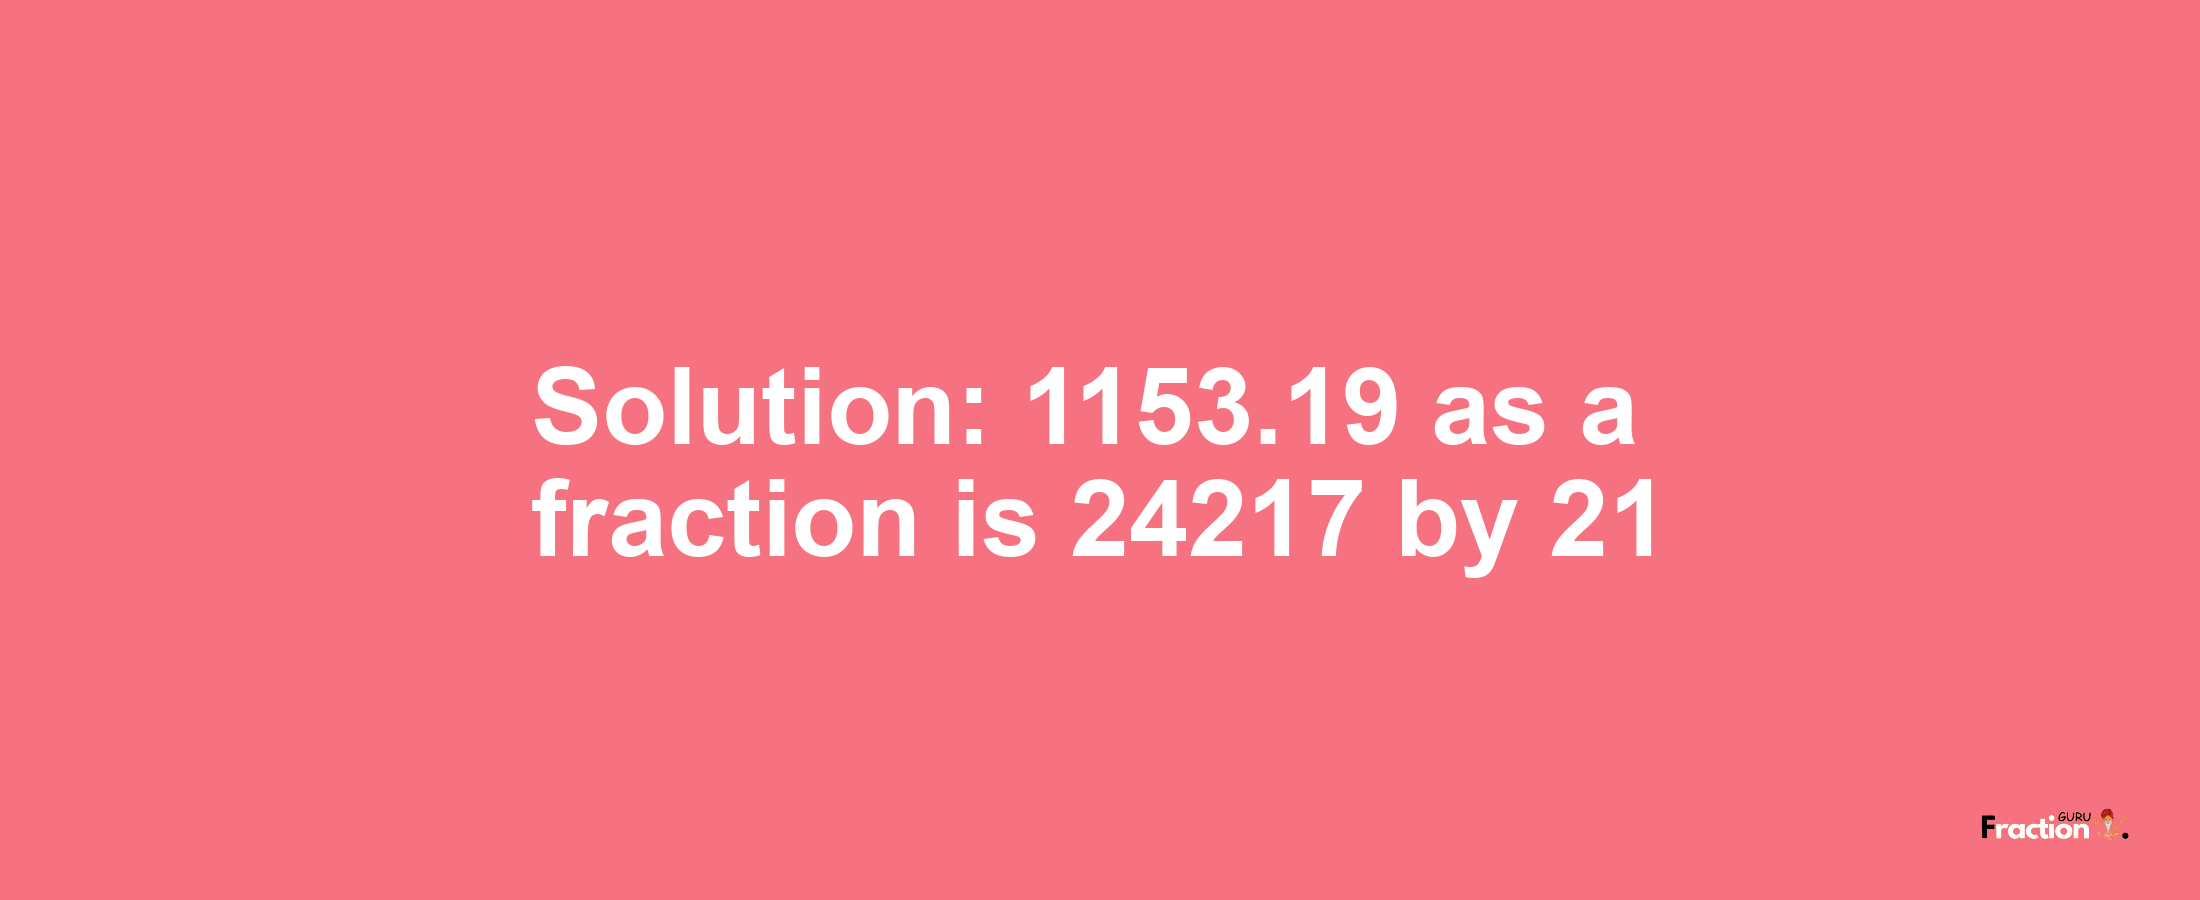 Solution:1153.19 as a fraction is 24217/21